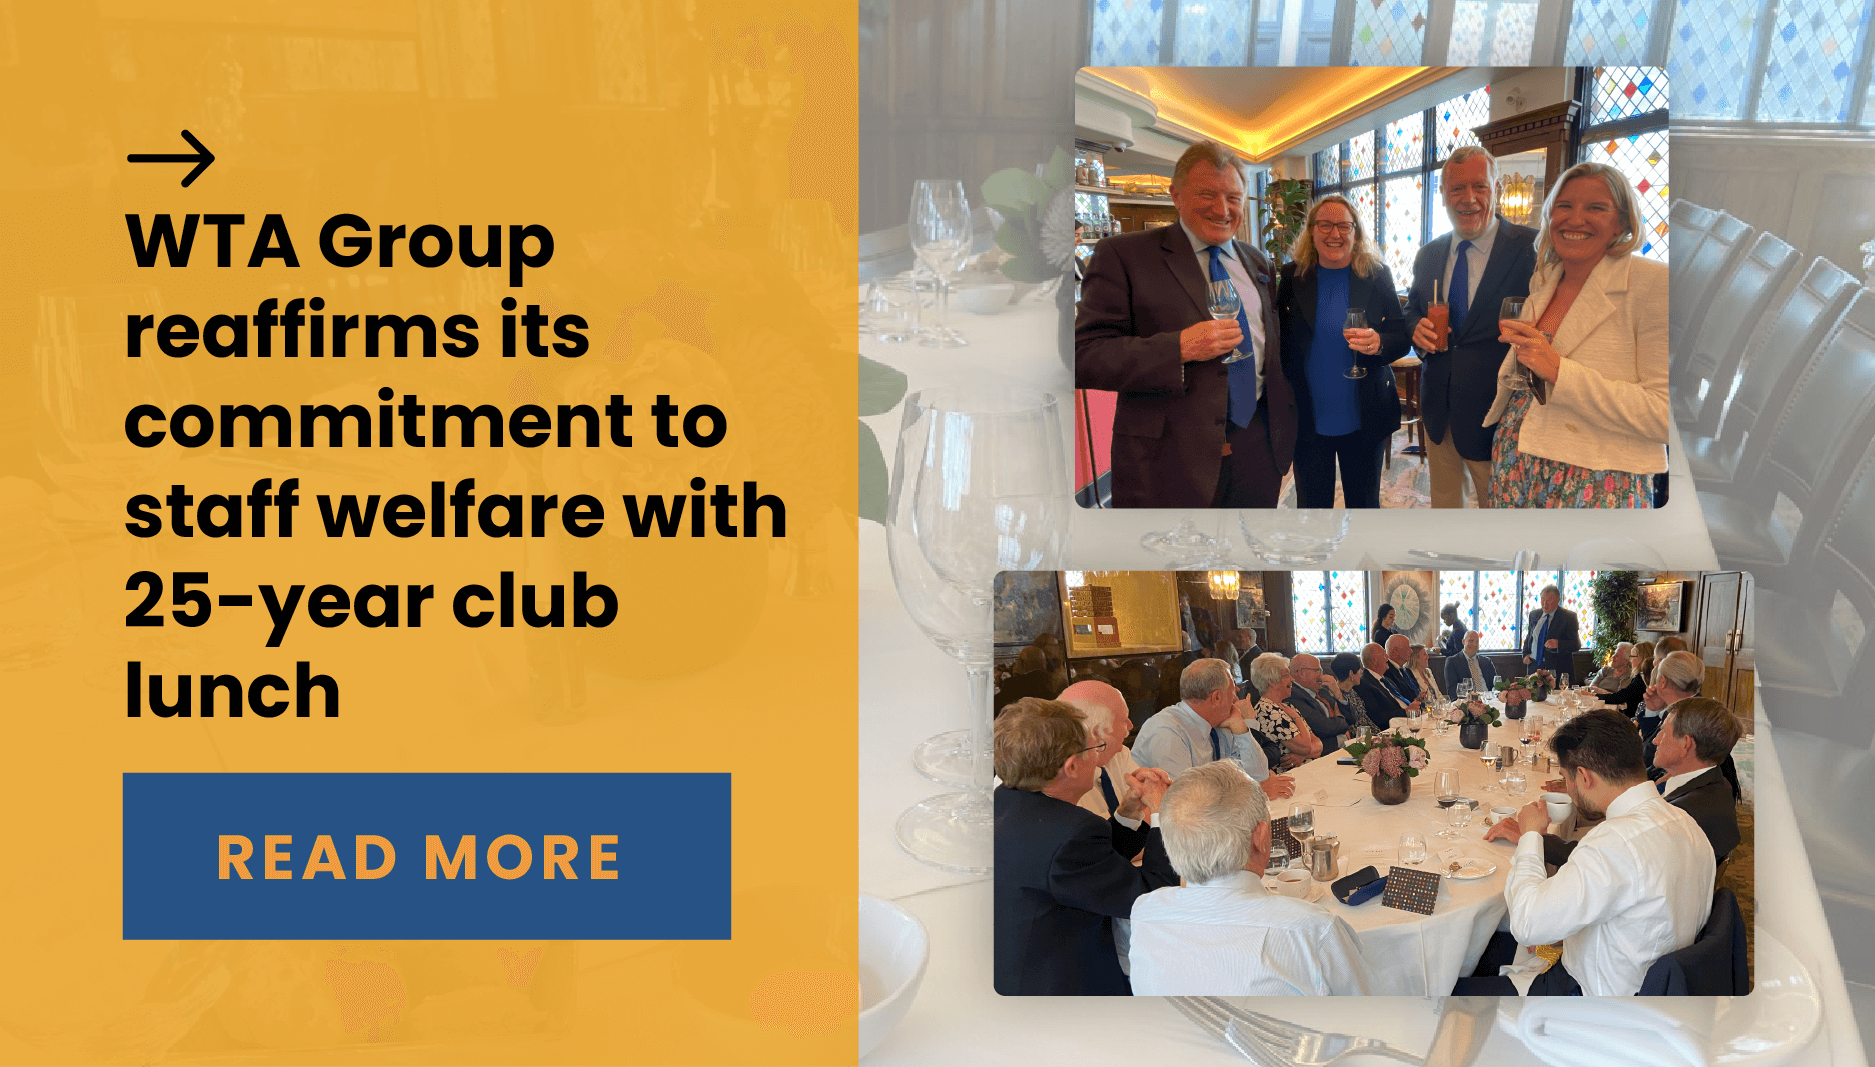 WTA Group reaffirms its commitment to staff welfare with annual 25-year club lunch